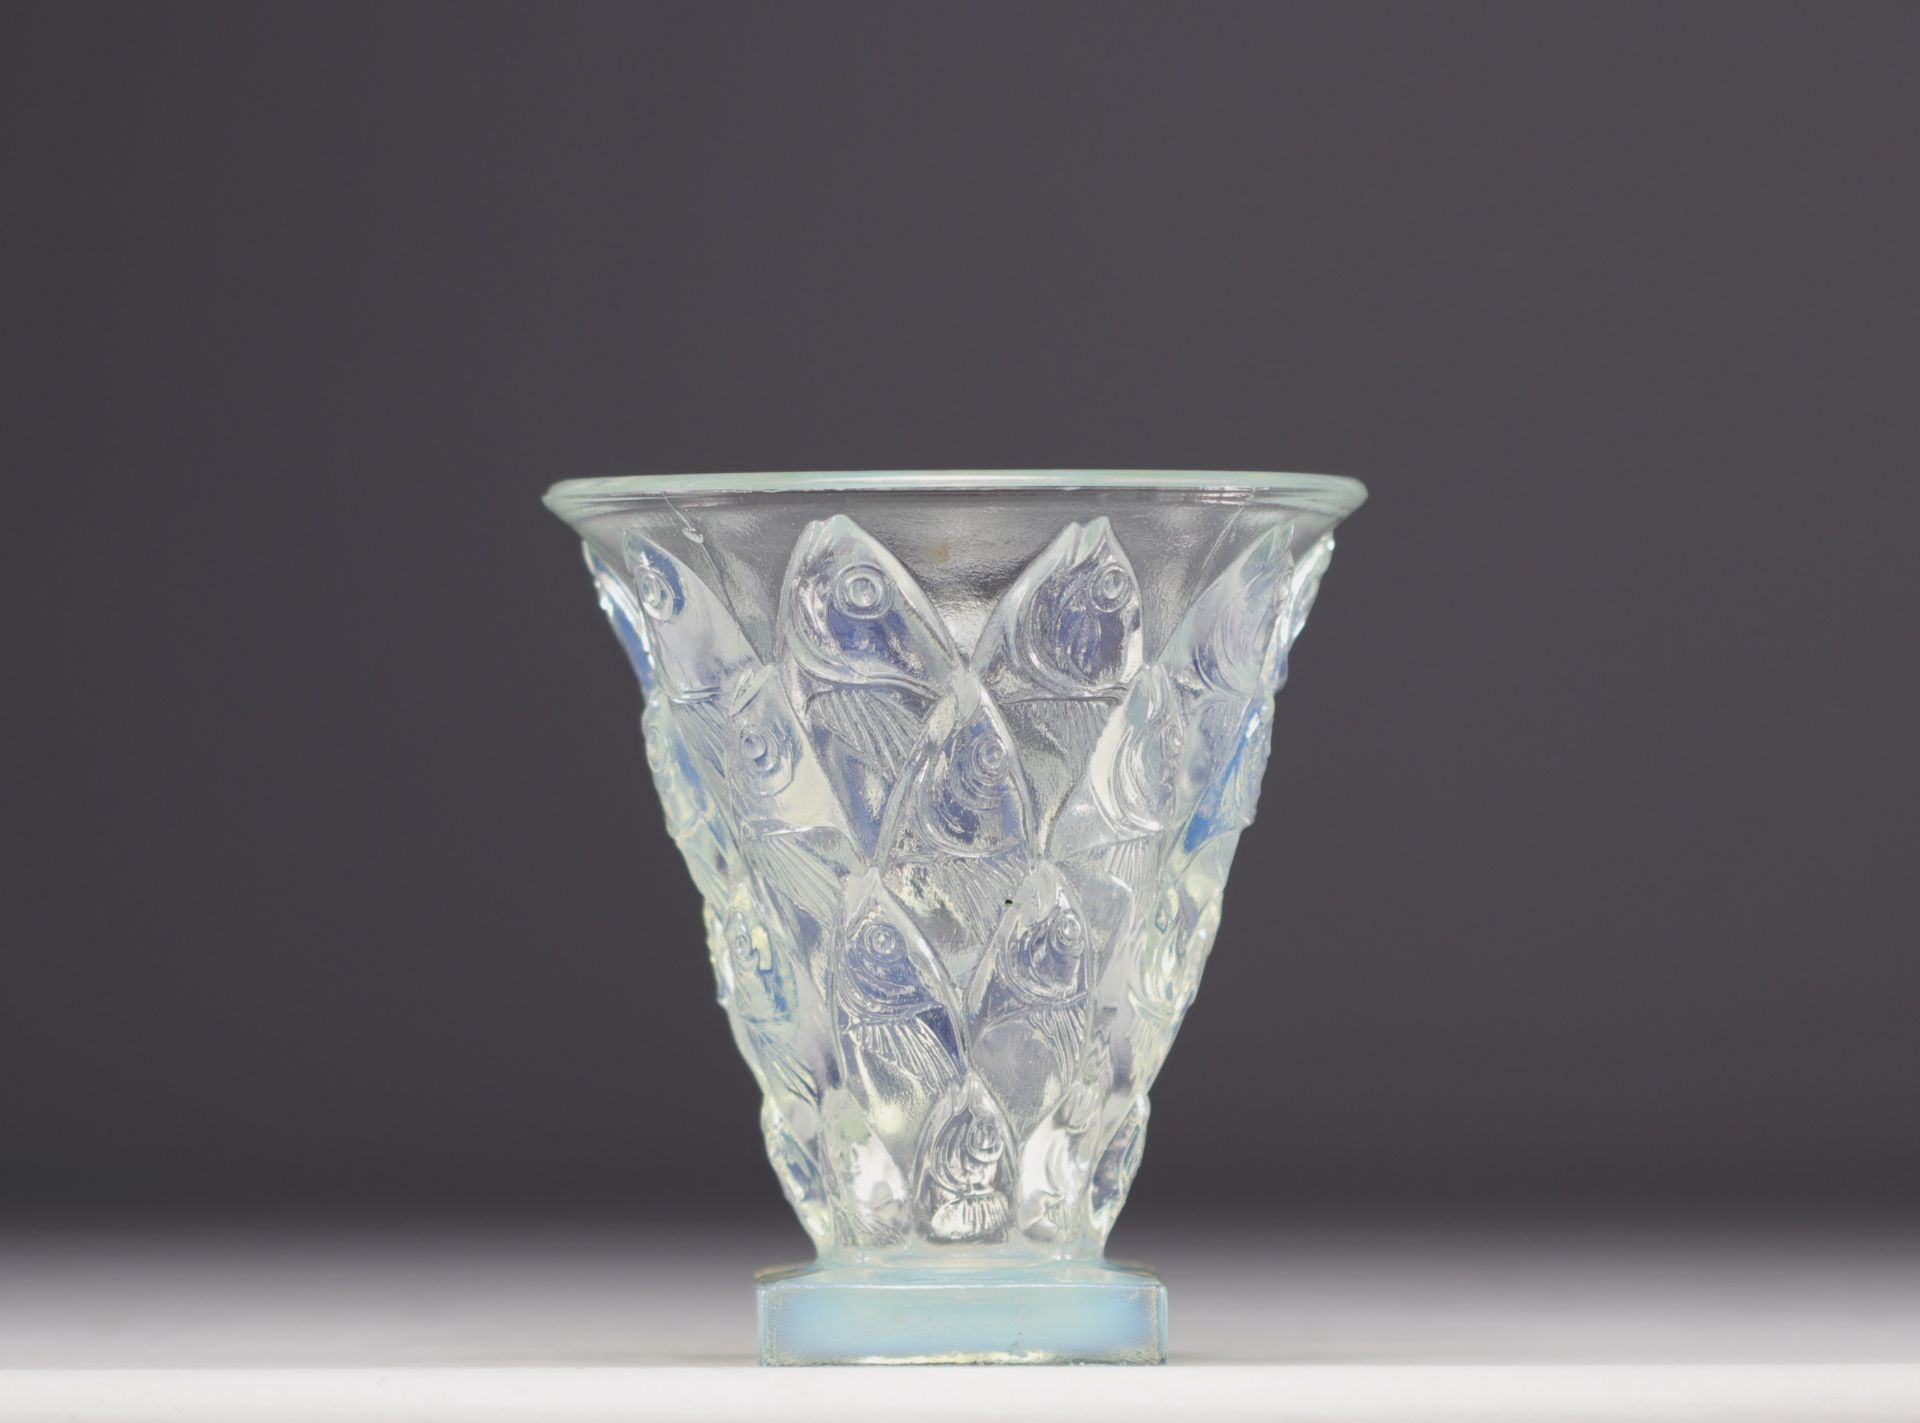 Marius SABINO (1878 -1961), "To the fish" ("Aux Poissons") vase in moulded glass.